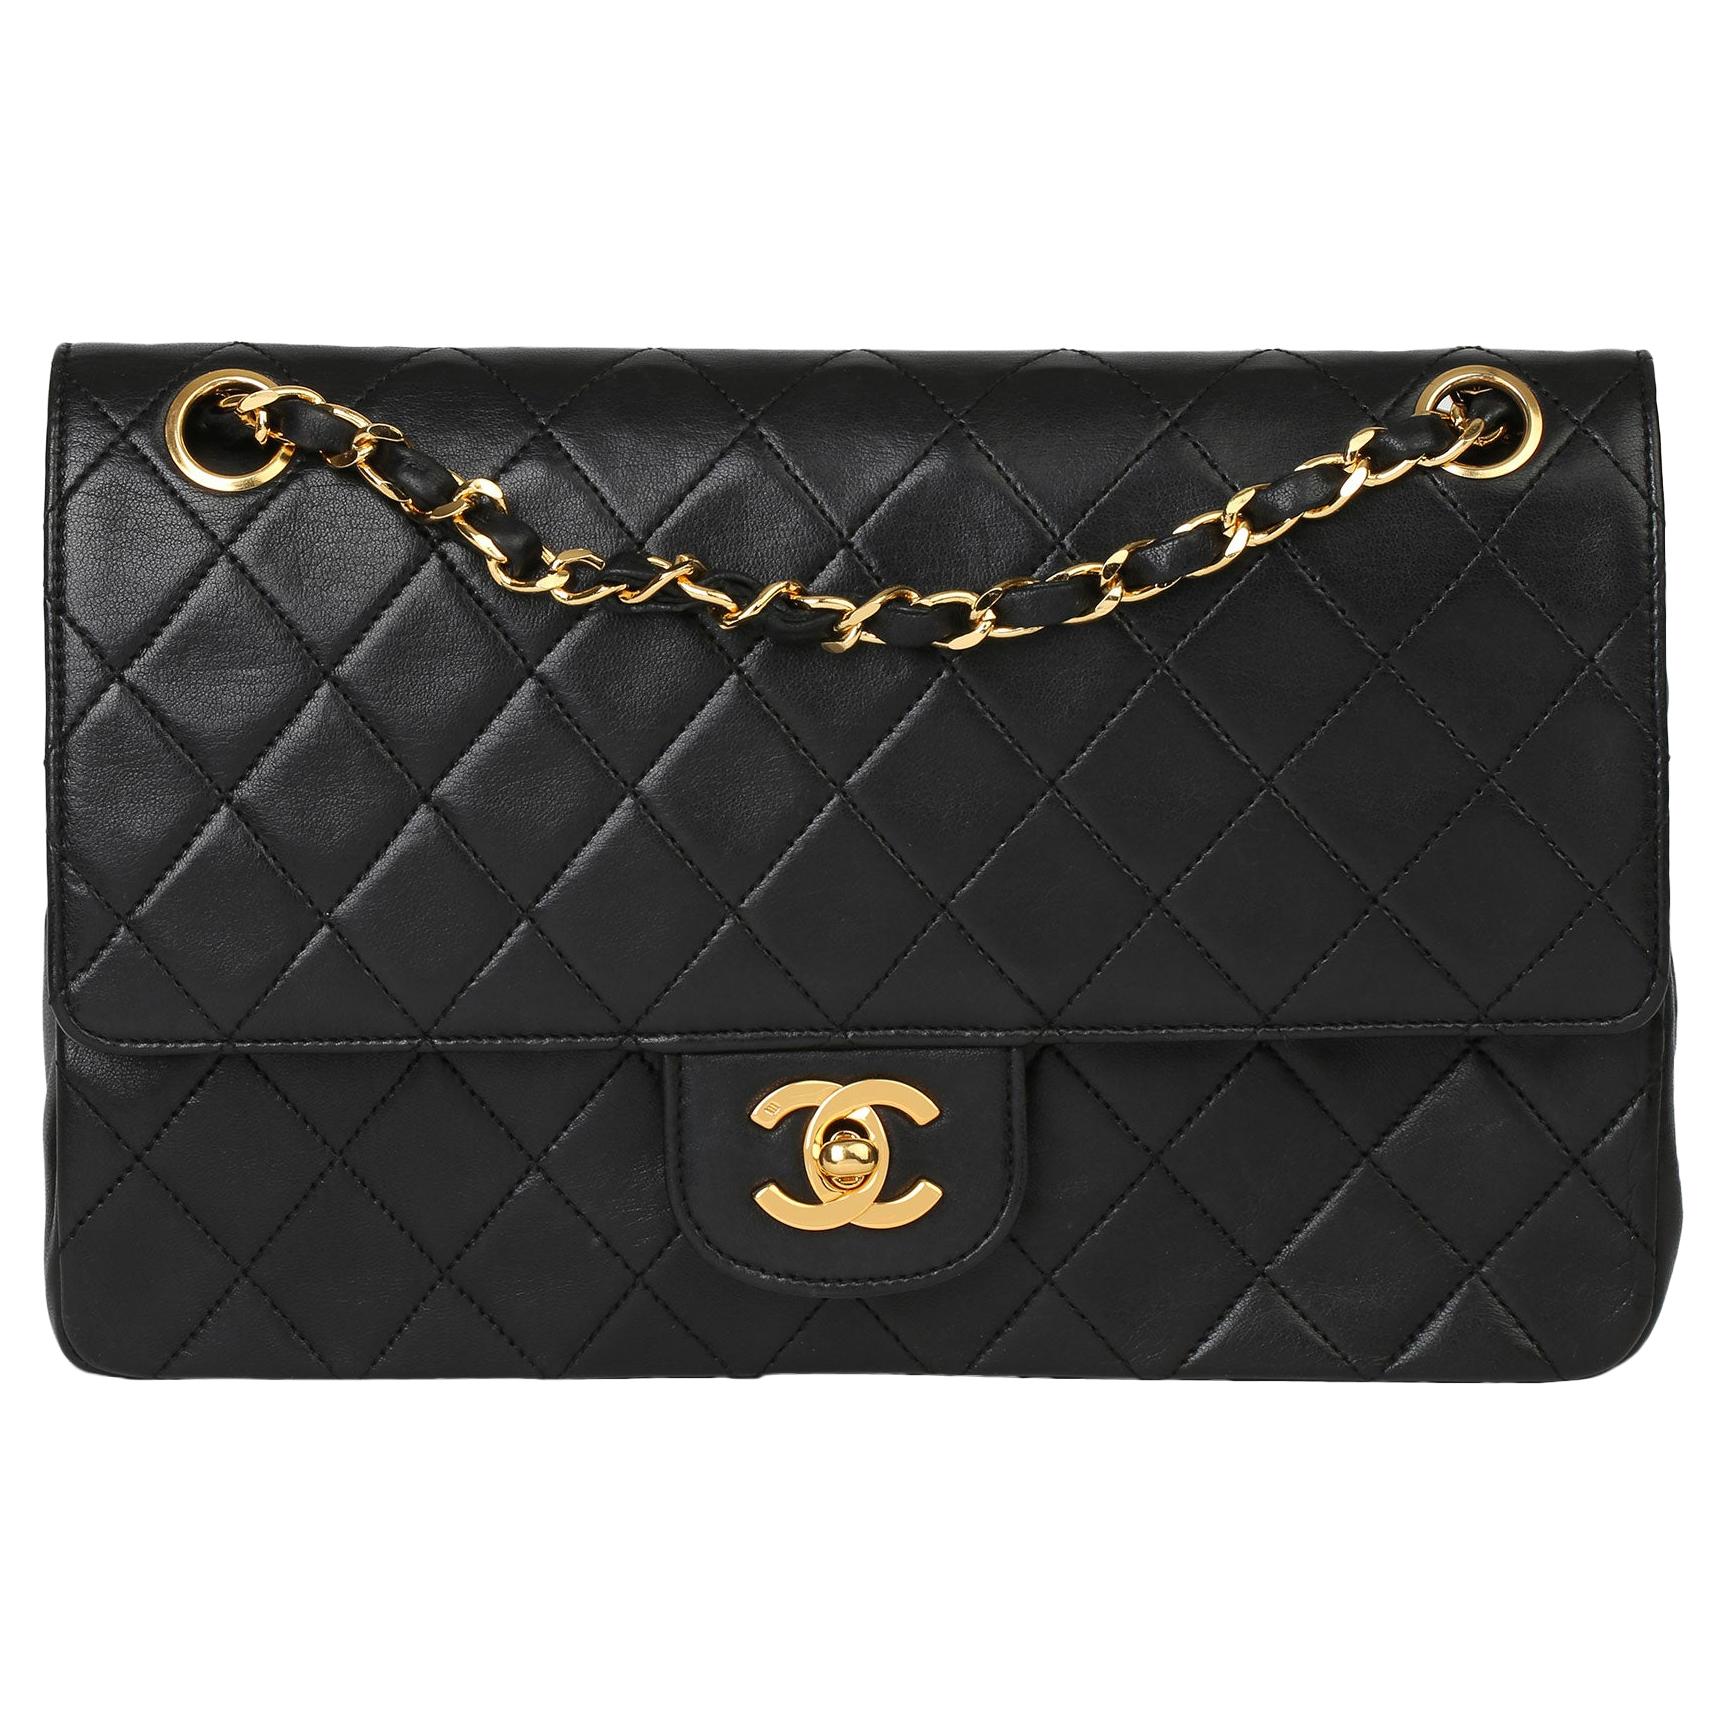 1987 Chanel Black Quilted Lambskin Vintage Medium Classic Double Flap Bag 